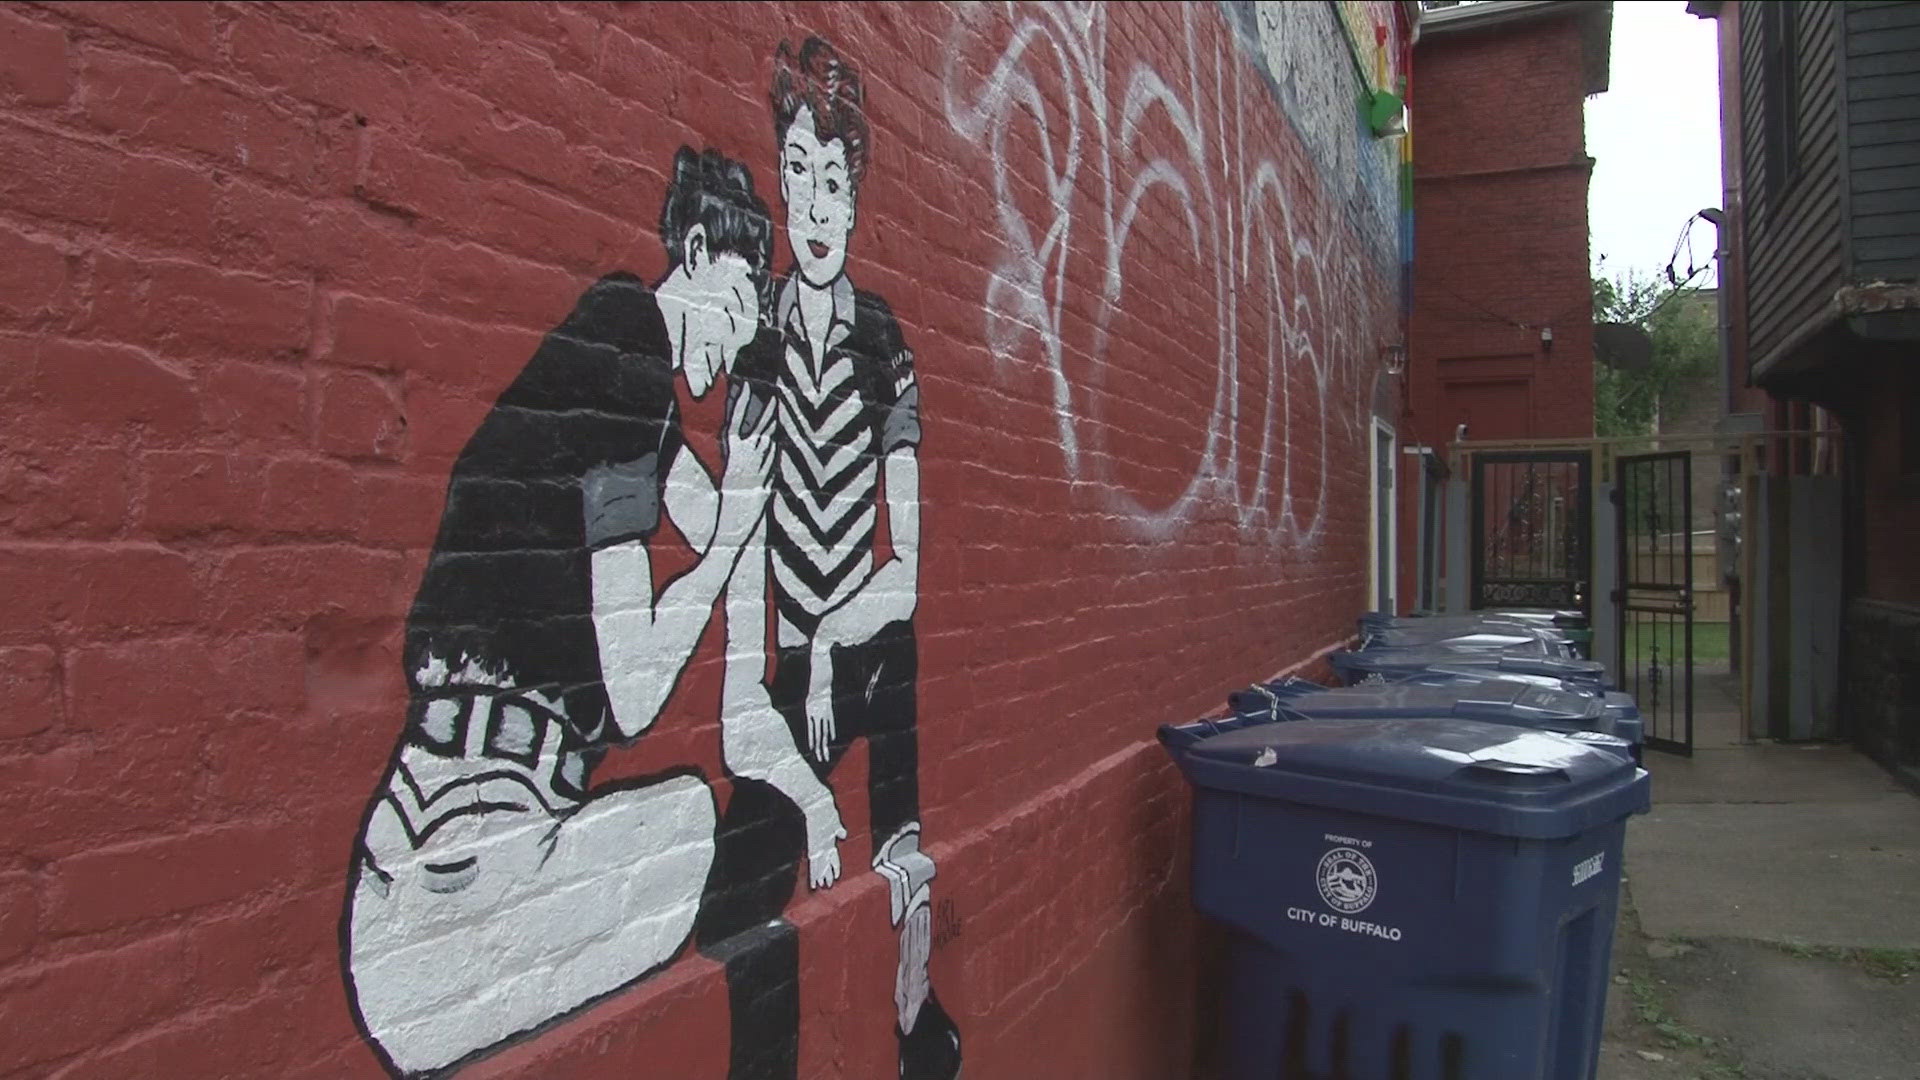 The "Stonewall Nation: WNY LGBT History Mural" is part of the Buffalo AKG's public art initiative, and it celebrates and recognizes key local and national figures.